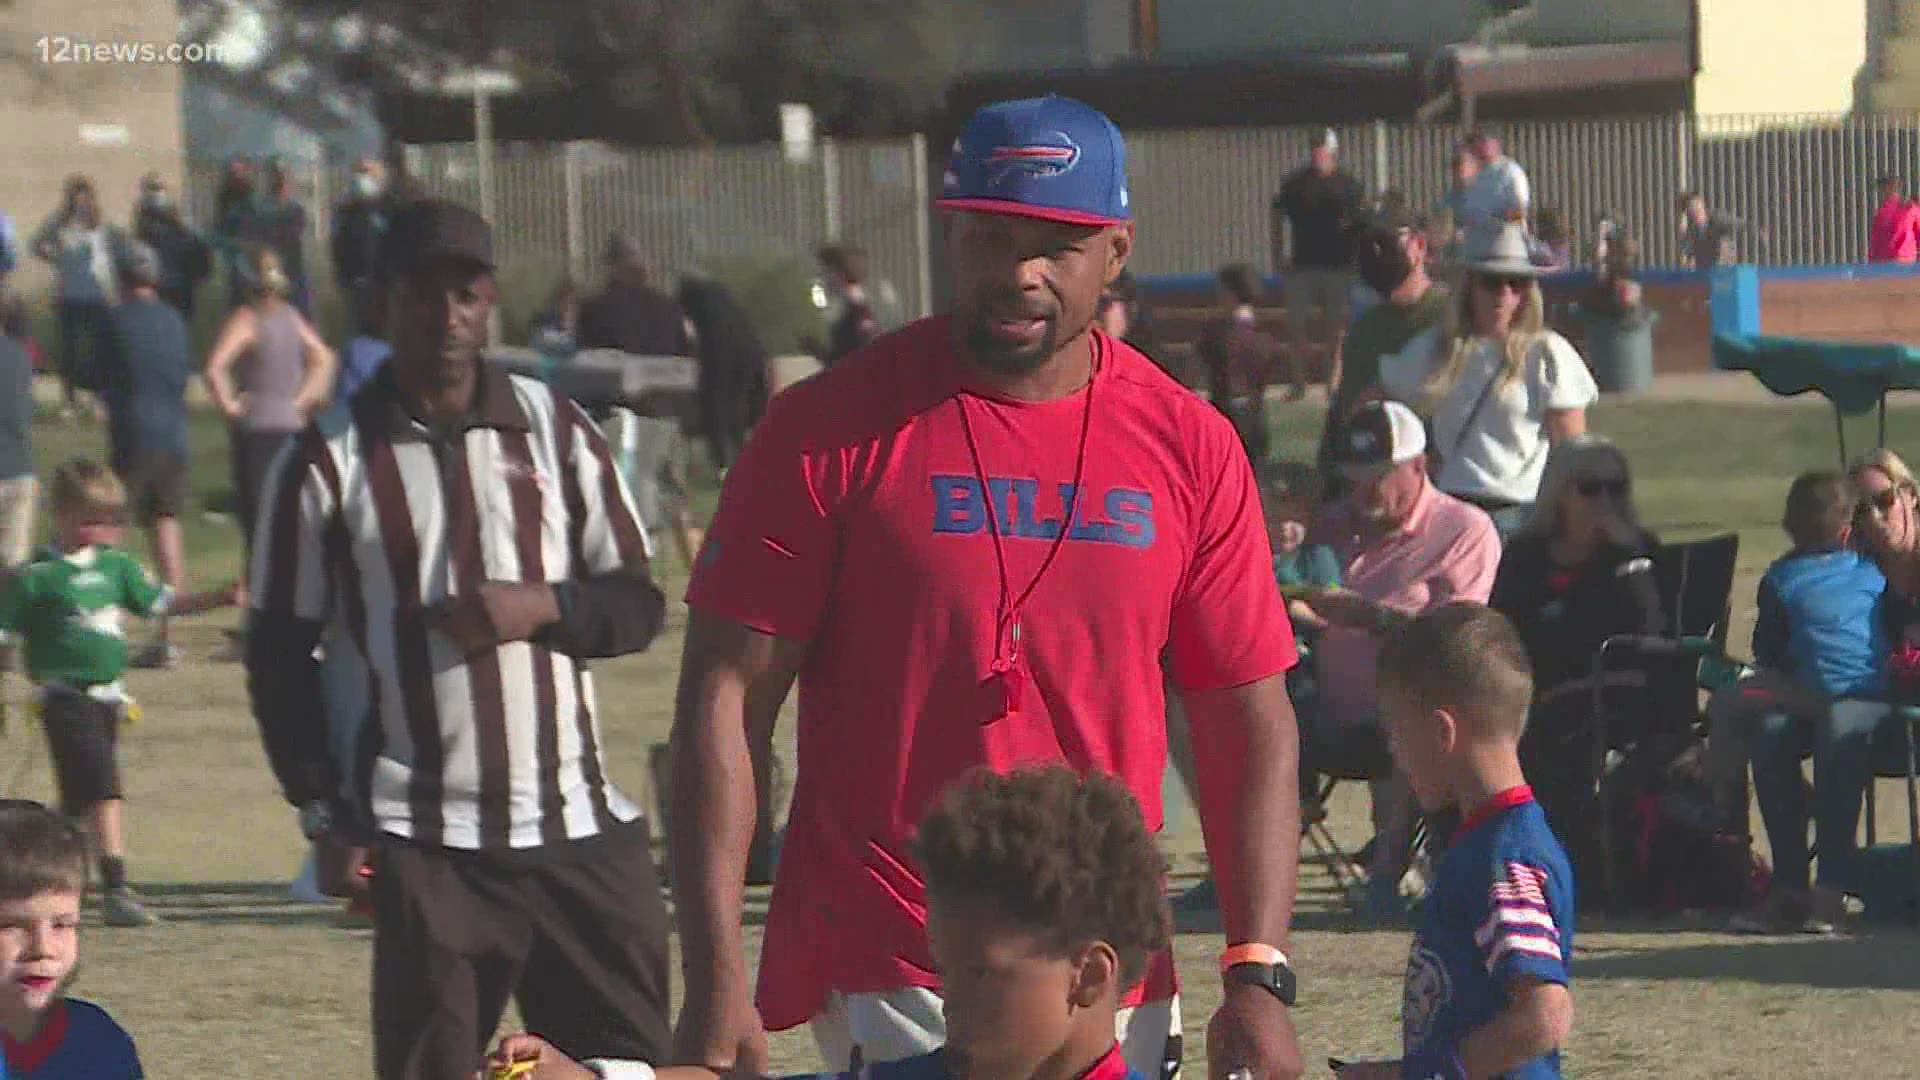 Lorenzo Alexander's post-retirement life includes coaching flag football and running a league in the Valley that he hopes will safely prepare kids for the next level